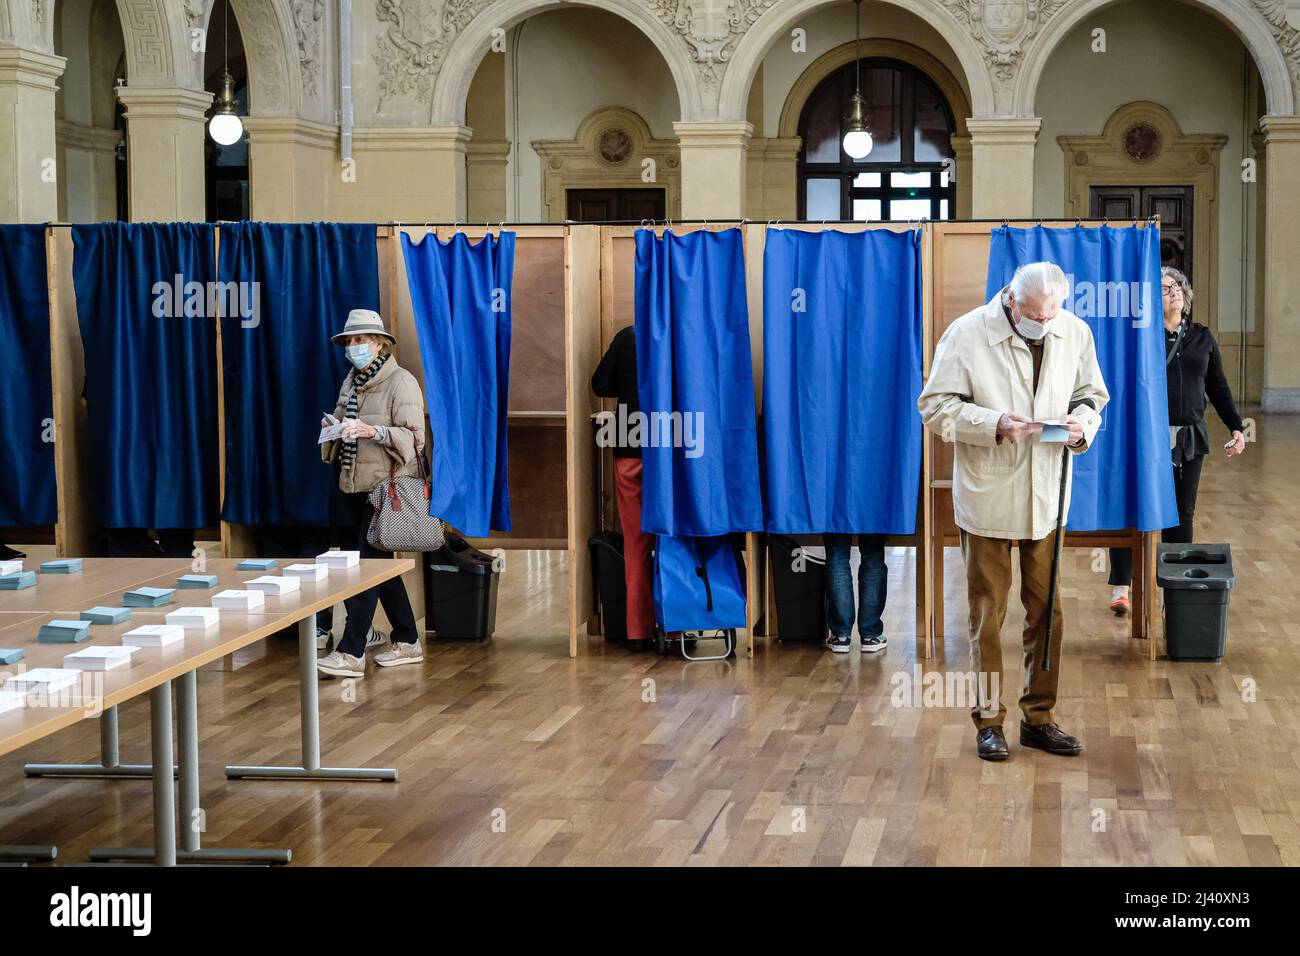 Lyon (France), 10 April 2022. First round of the presidential election in the Palais de la Bourse polling station. Stock Photo